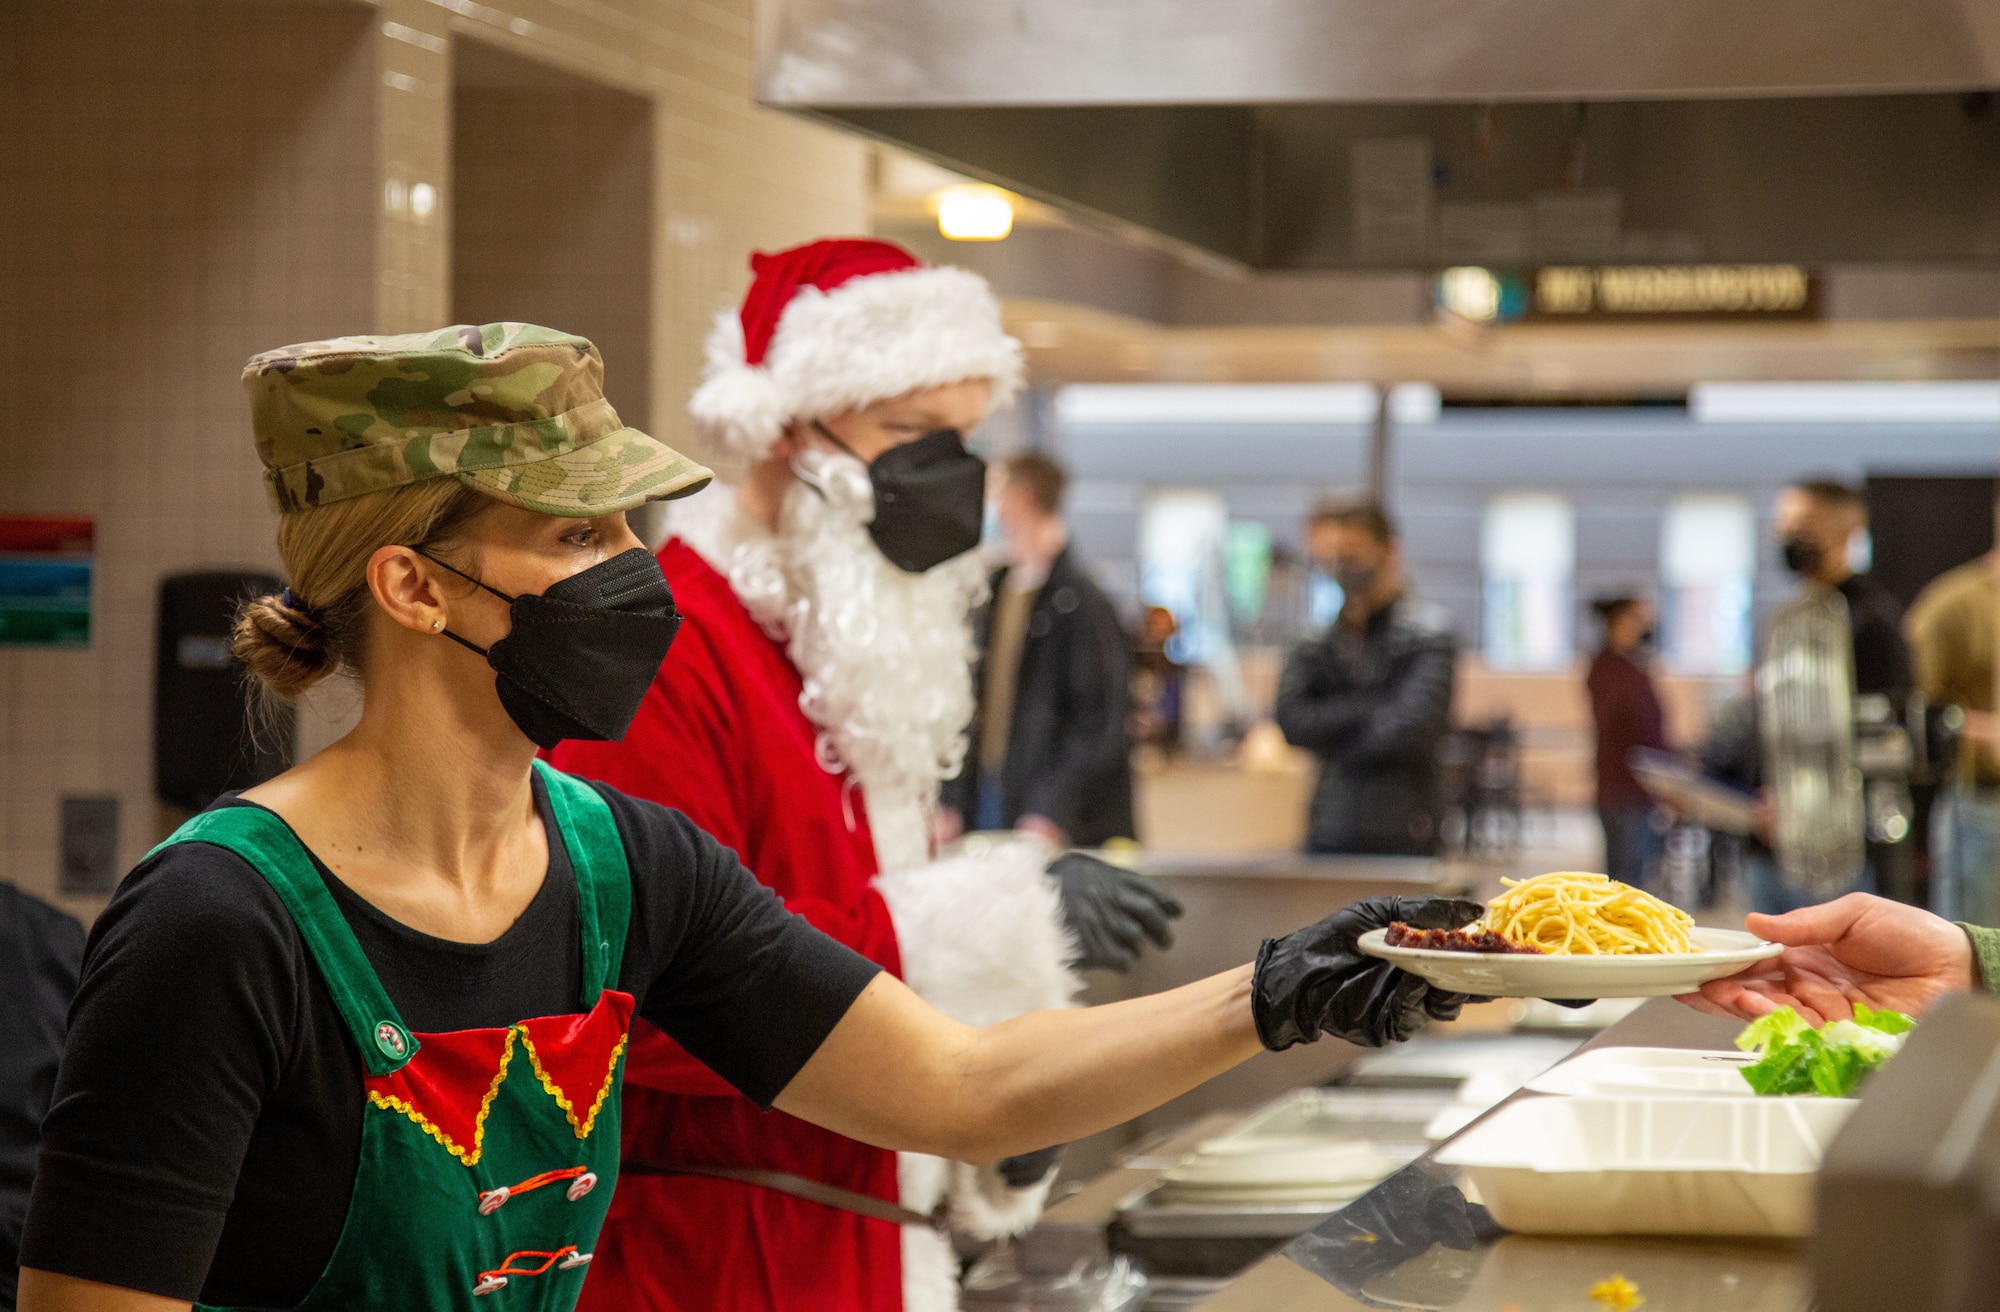 An elf with a military hat and a Santa serve food to patrons in dining facility.